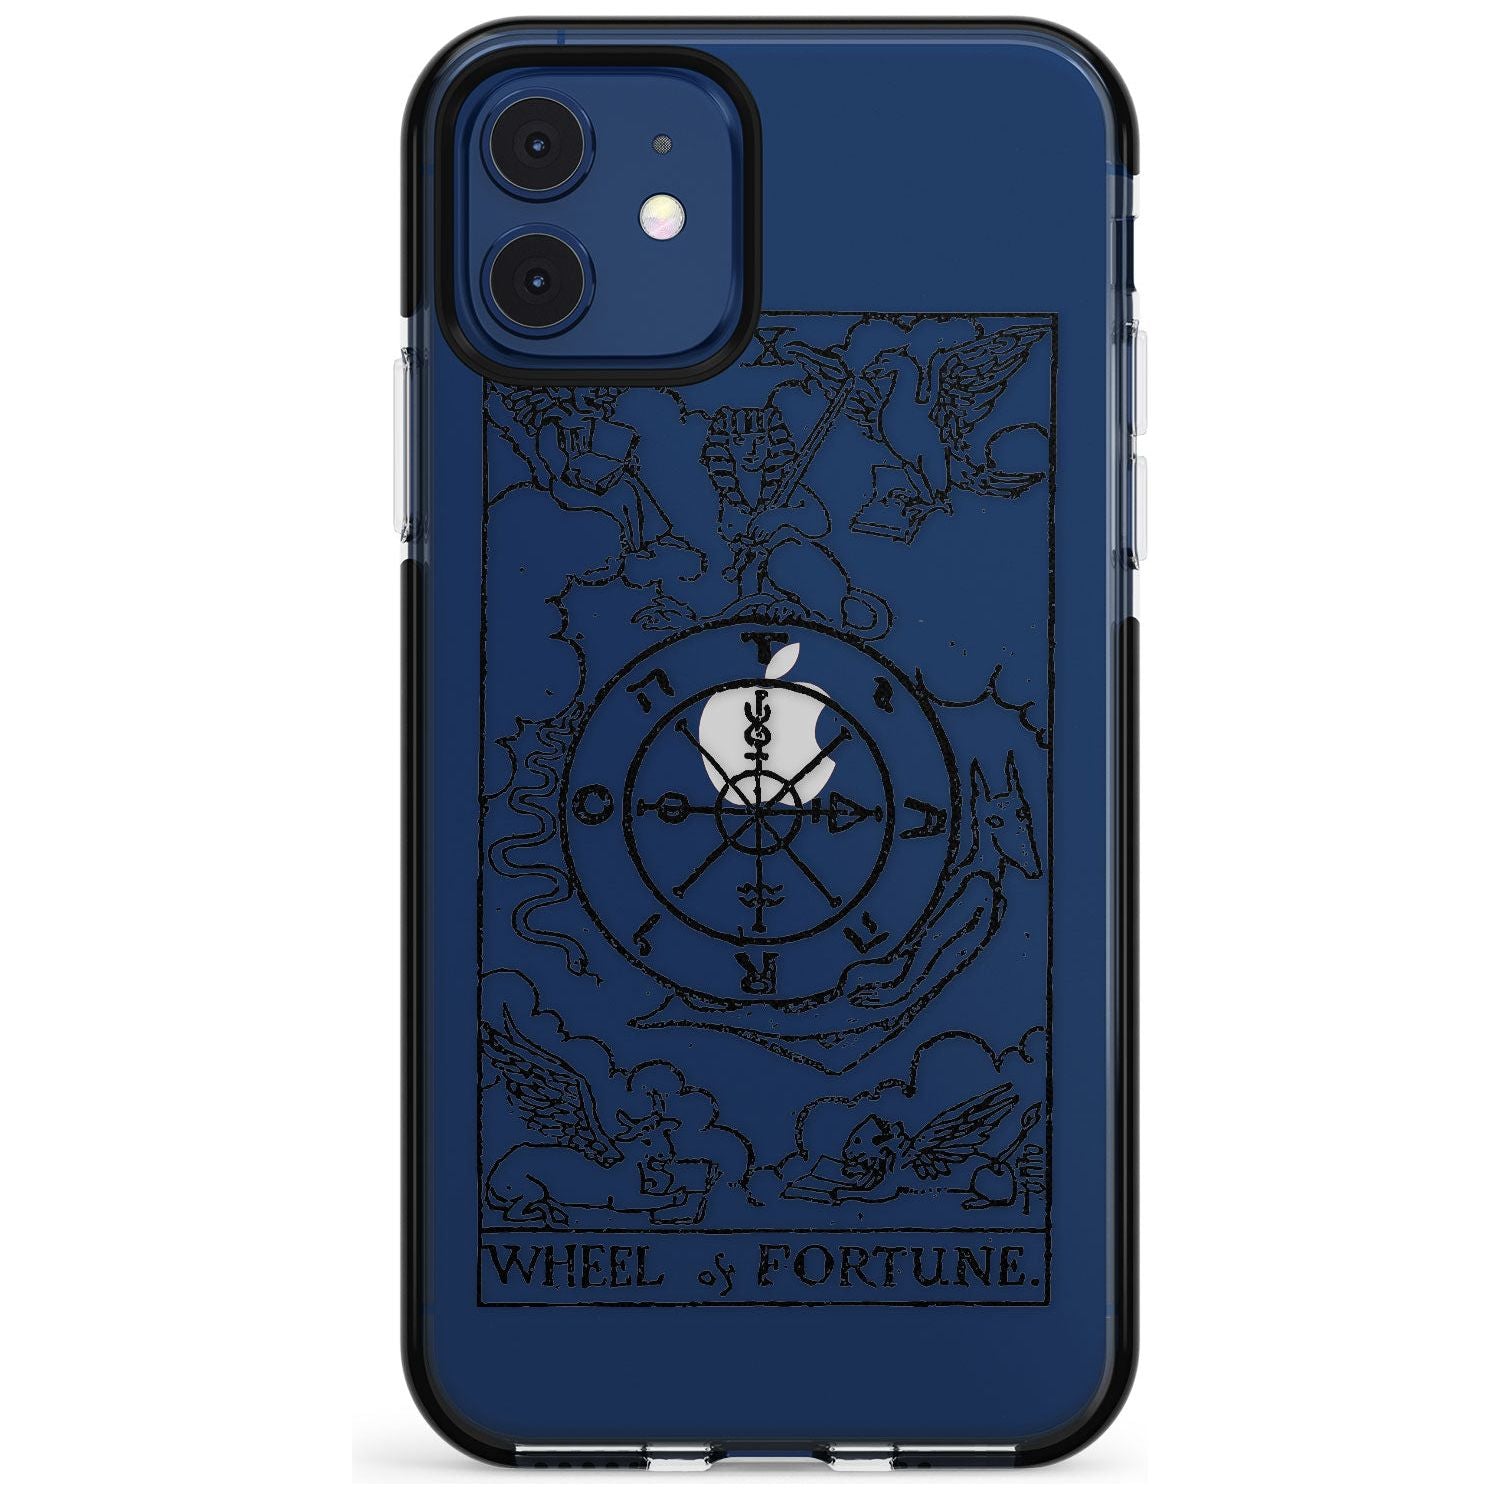 Wheel of Fortune Tarot Card - Transparent Pink Fade Impact Phone Case for iPhone 11 Pro Max